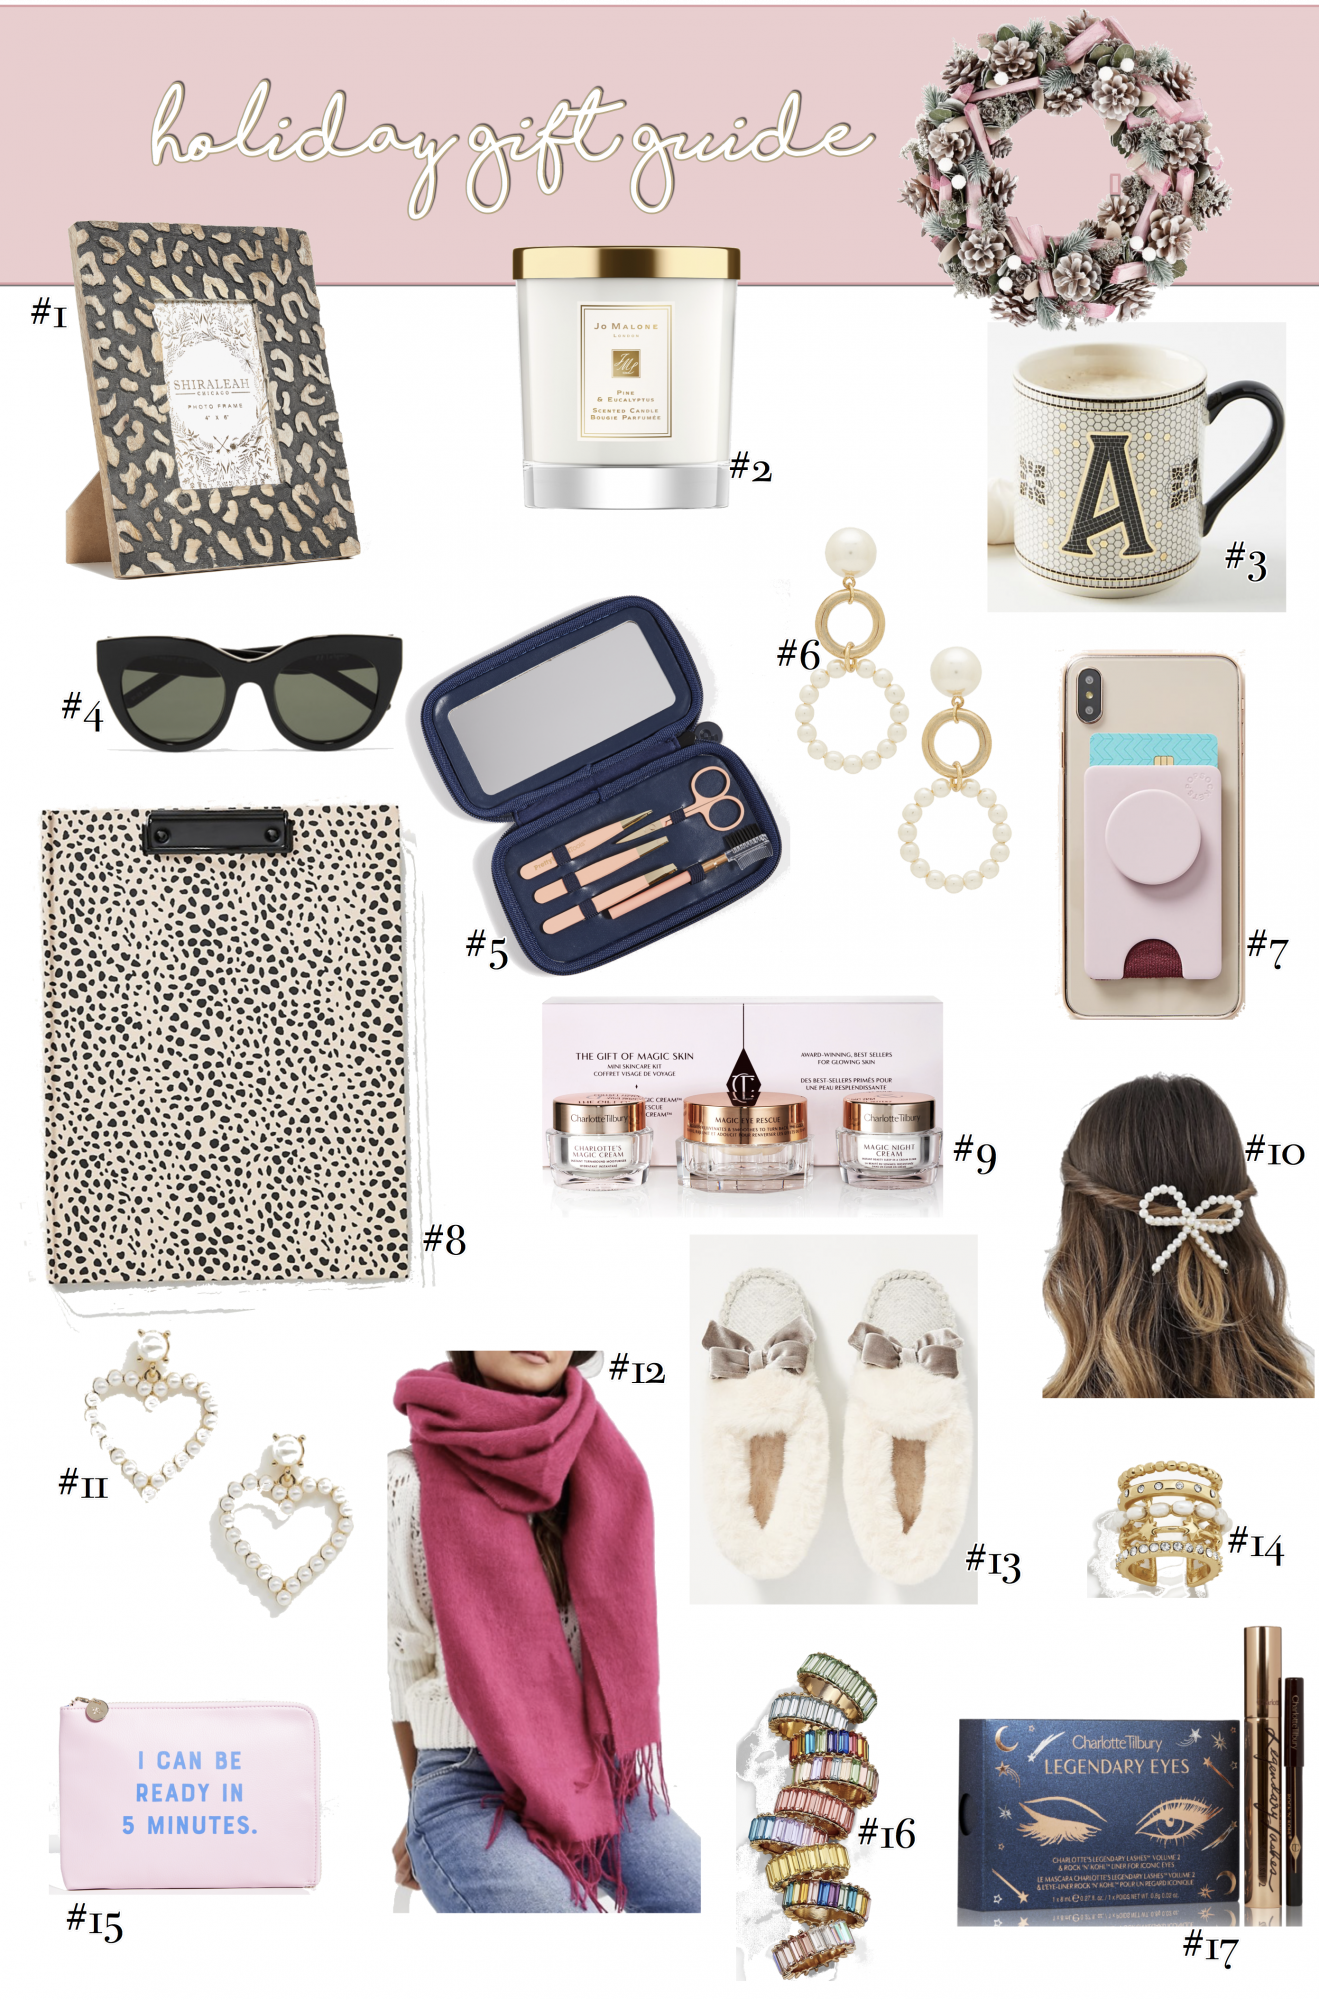 Holiday Gift Guide: Gifts for Her